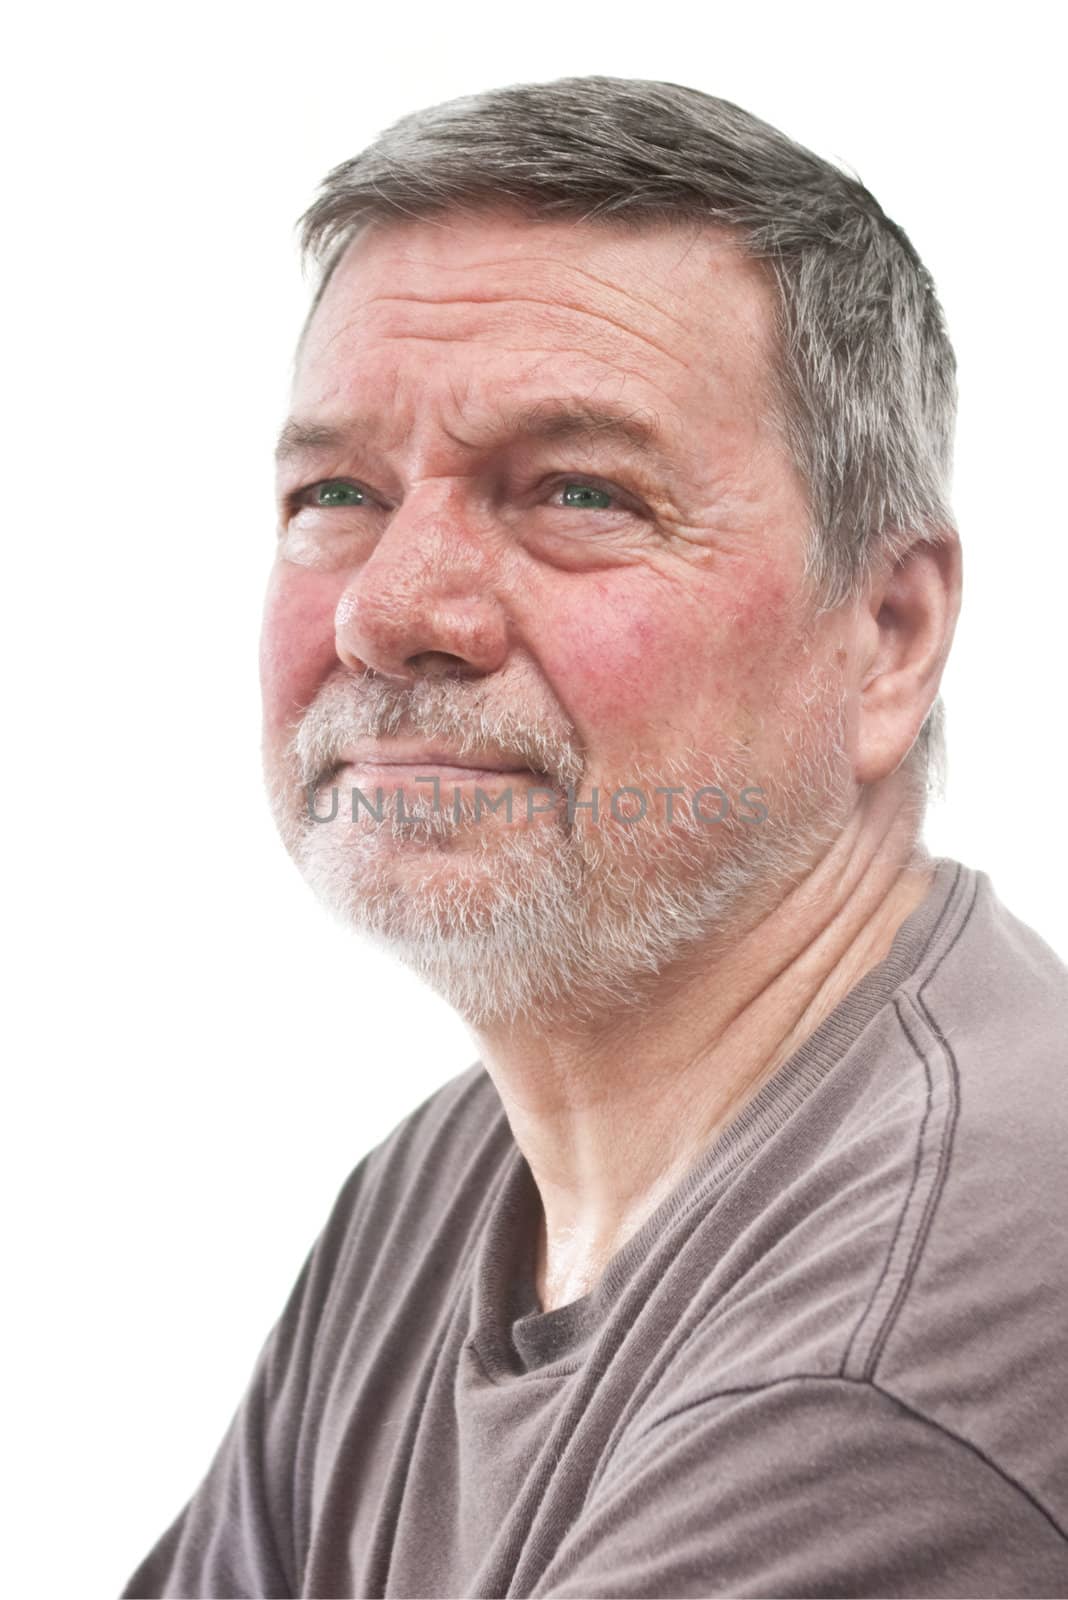 Mature man of 58 years, with white stubbly beard, 3/4 view, head & shoulders, isolated on white